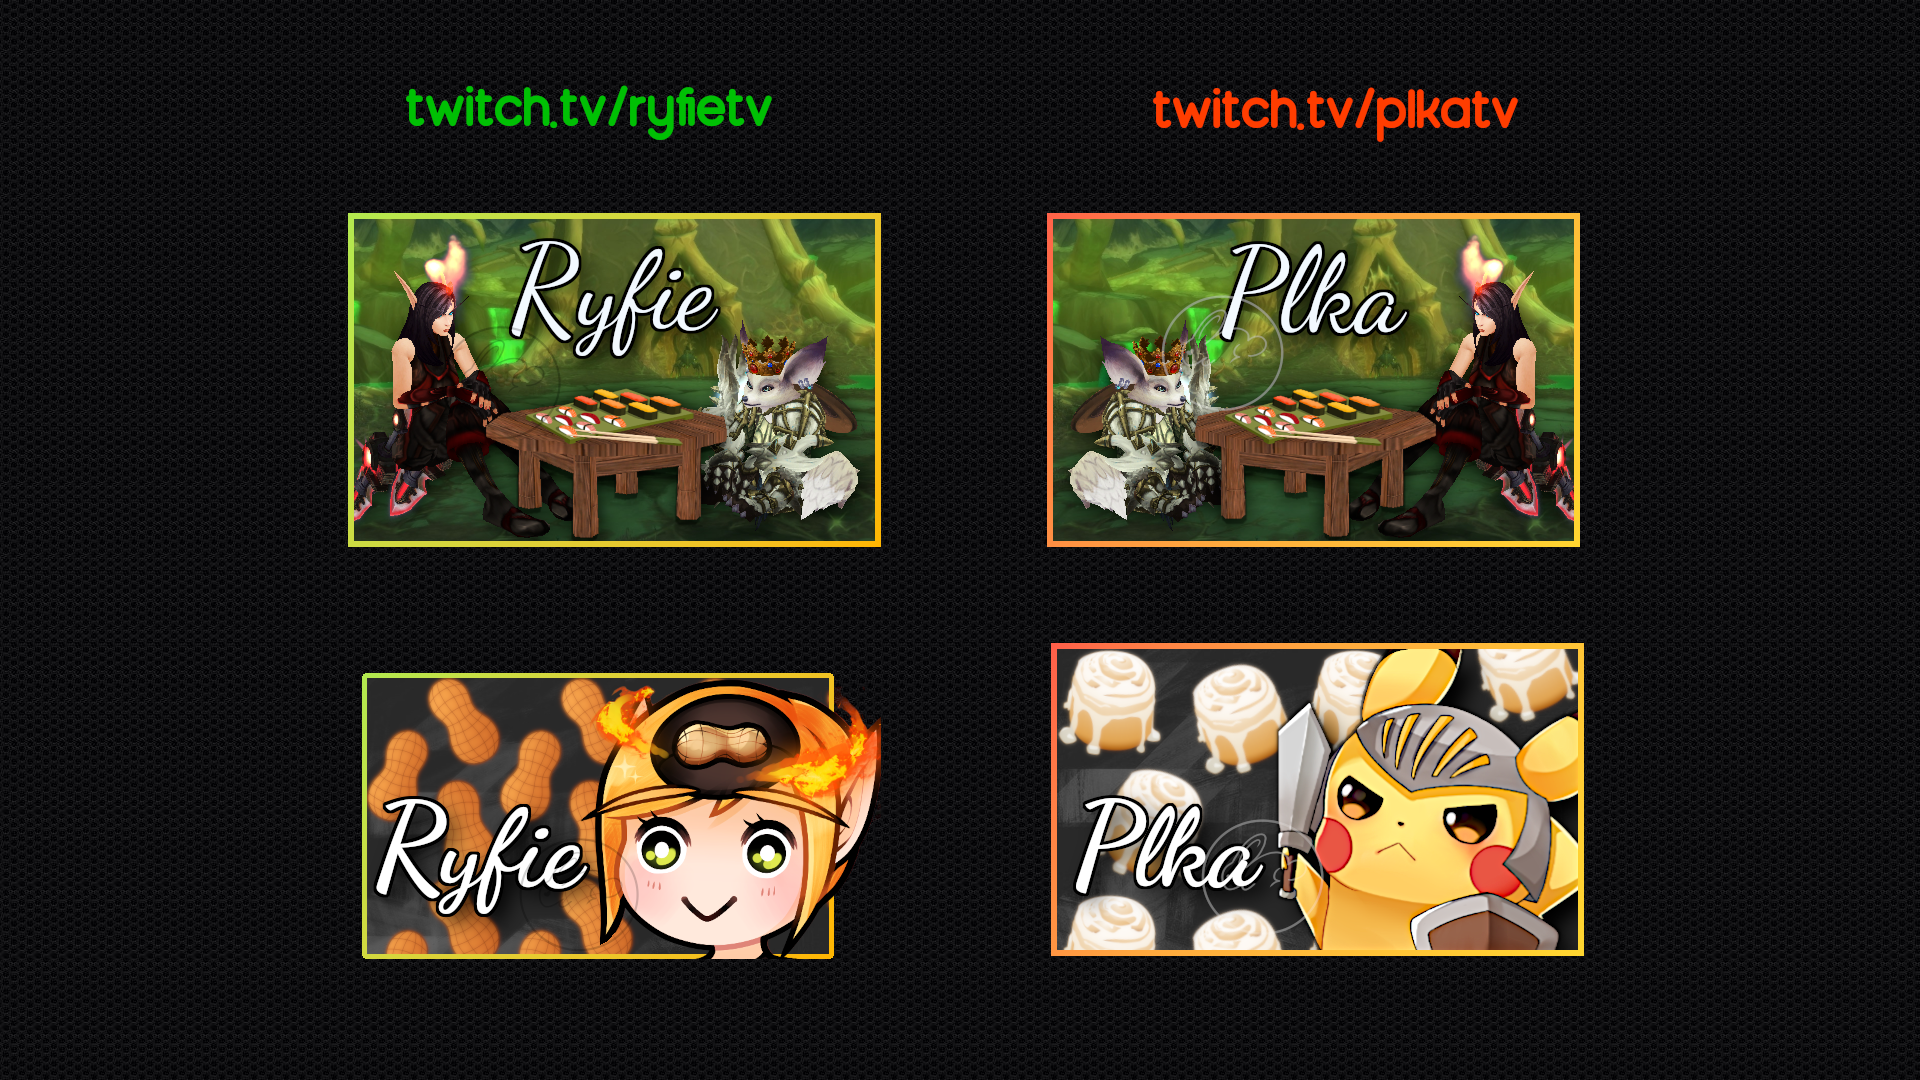 Matching Chatbox Covers for Plka and Ryfie